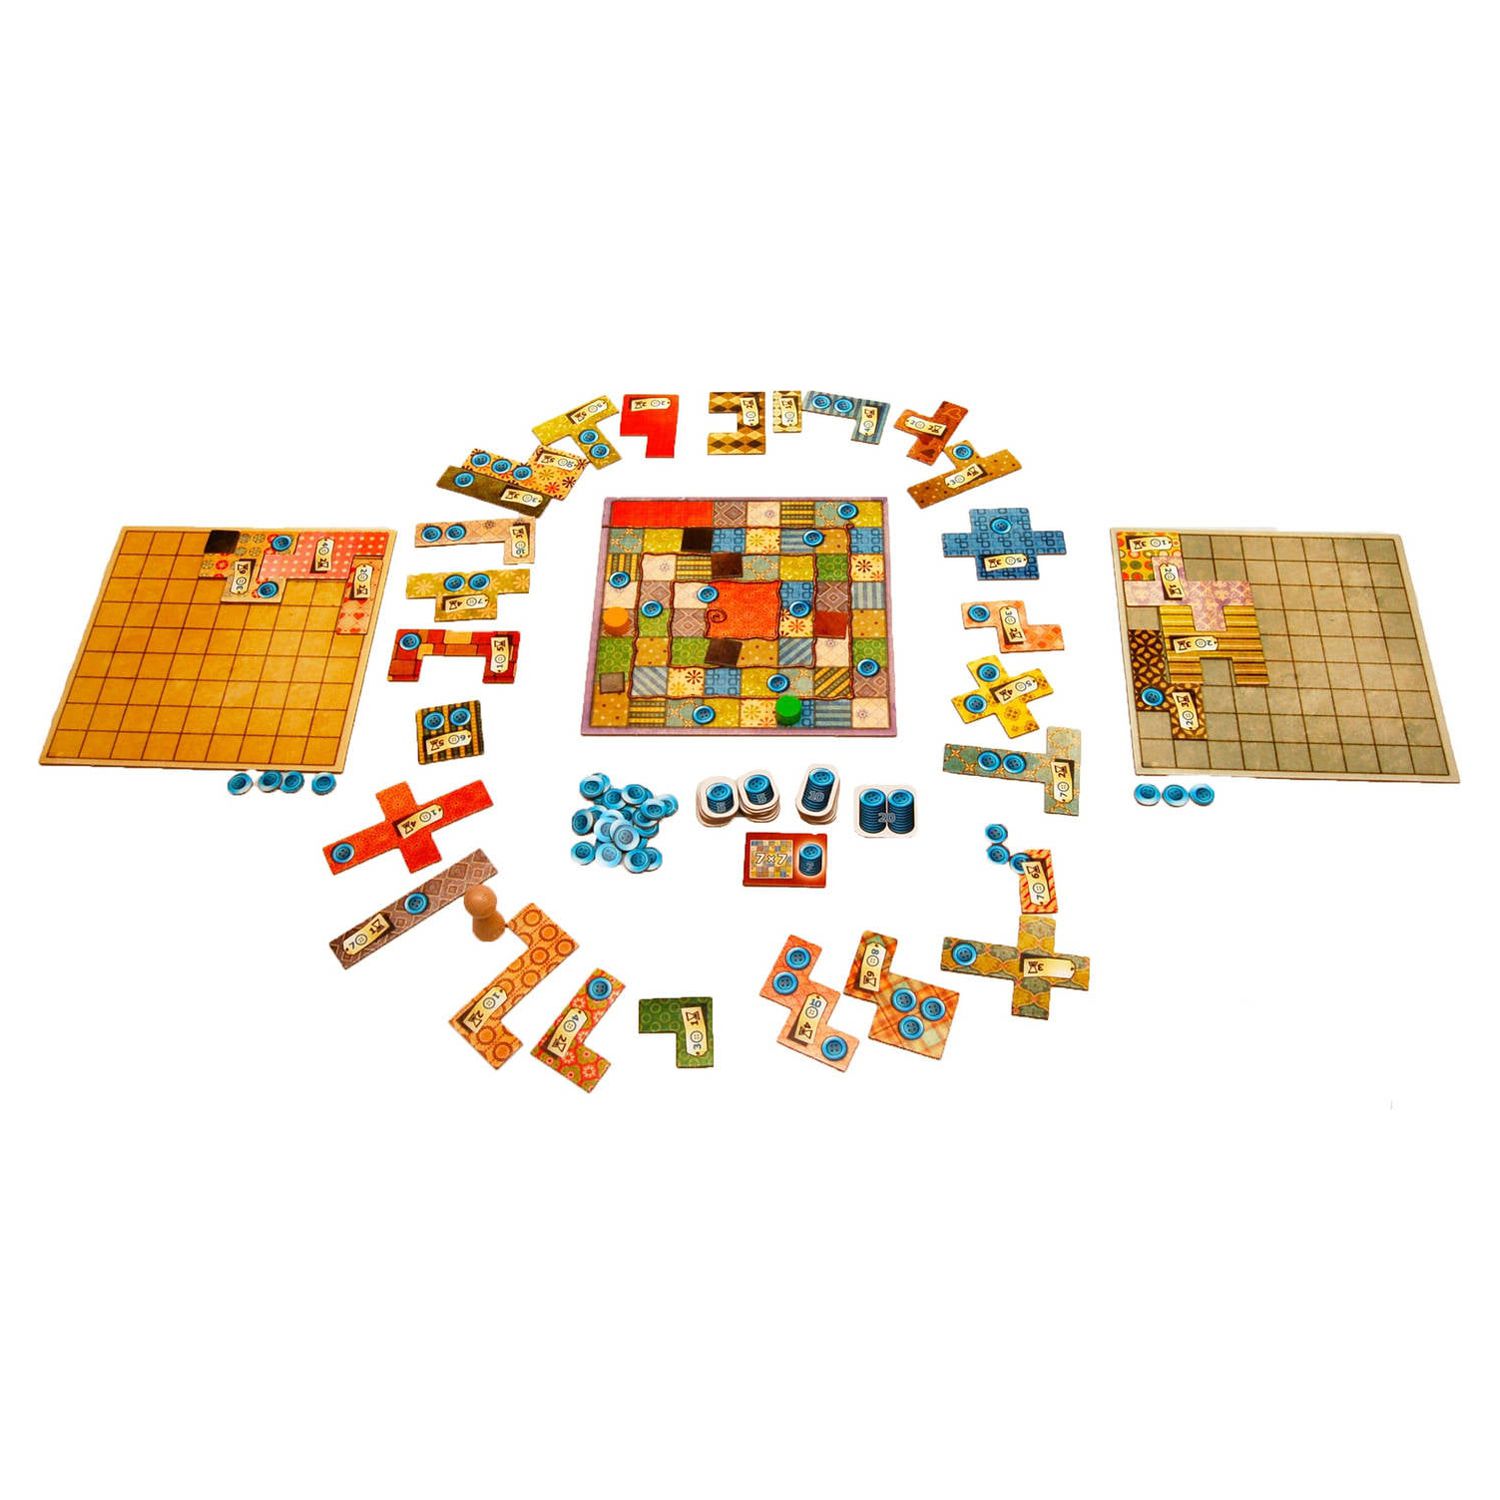 Patchwork Board Game for Ages 8 and up, From Asmodee - image 4 of 7